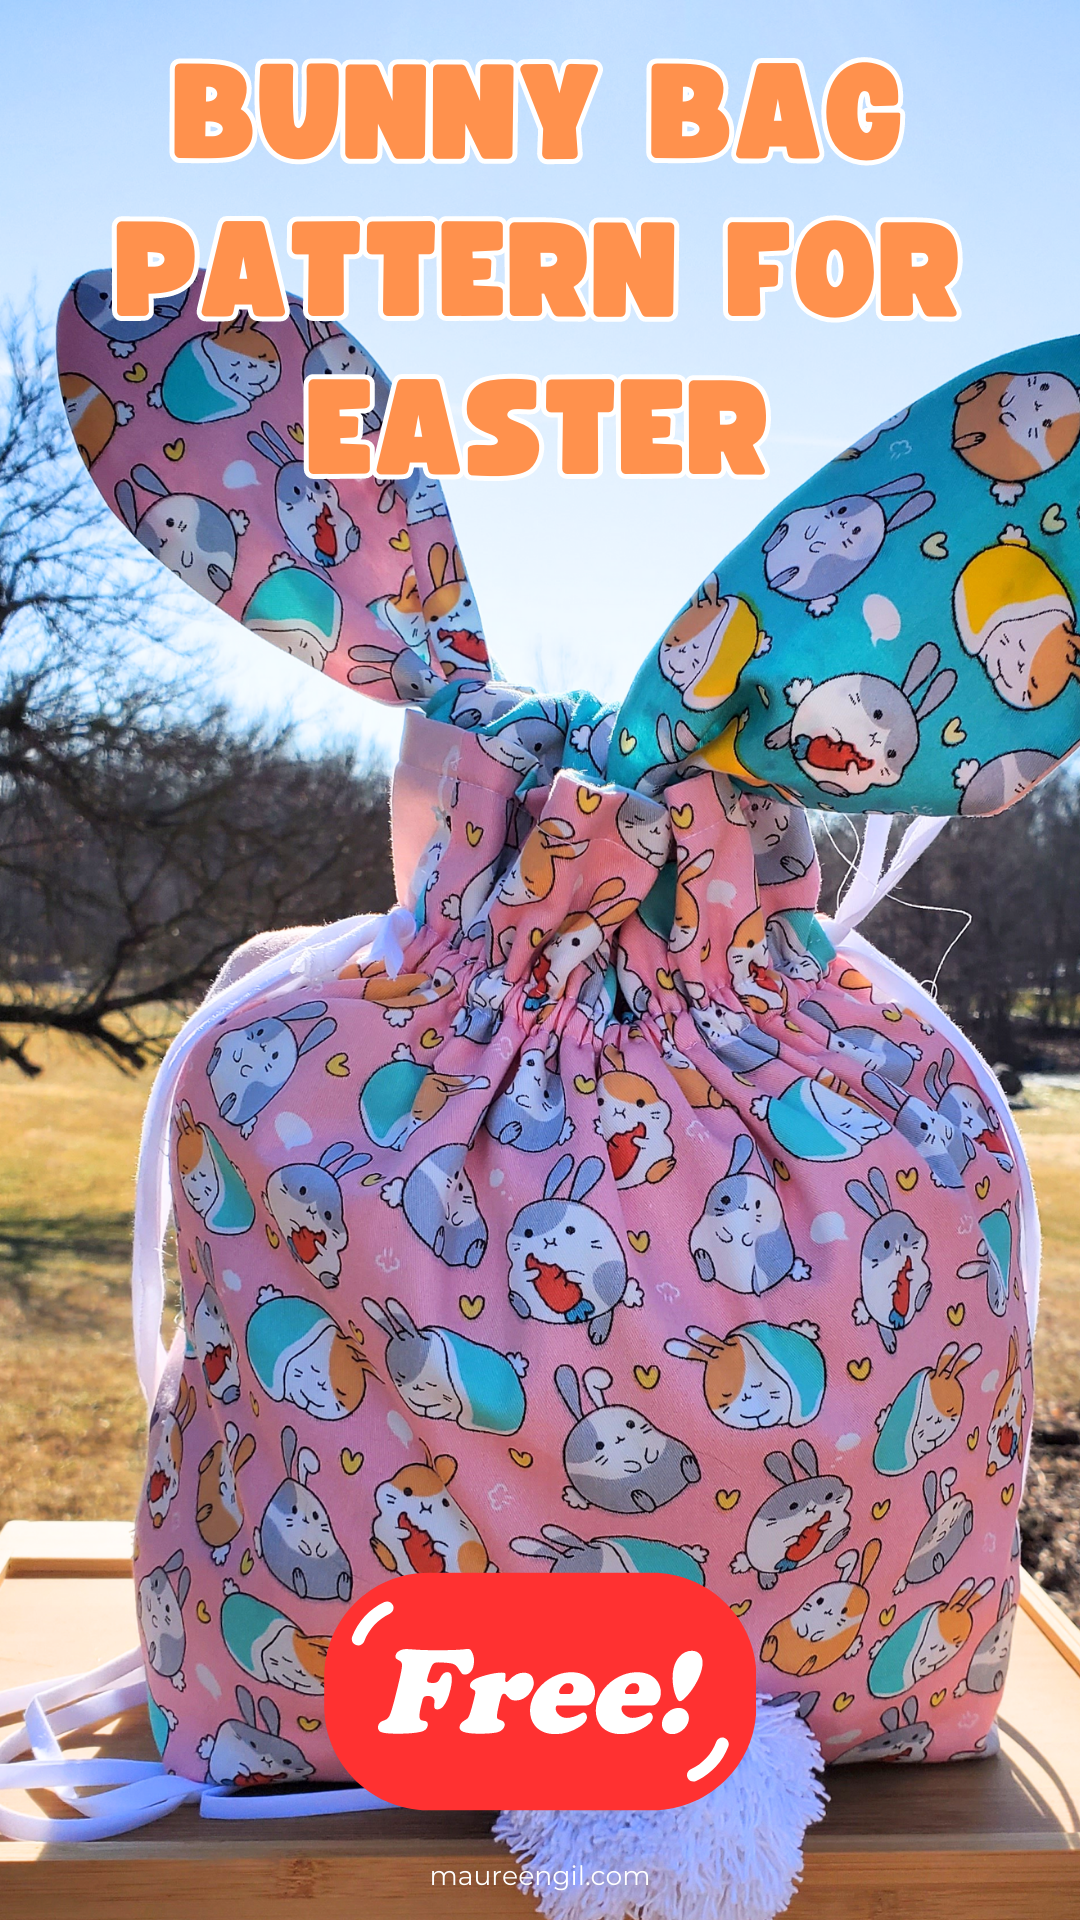 Looking for a fun Easter DIY project? This bunny ears drawstring bag pattern is easy to follow and will make a great addition to your Easter celebrations.